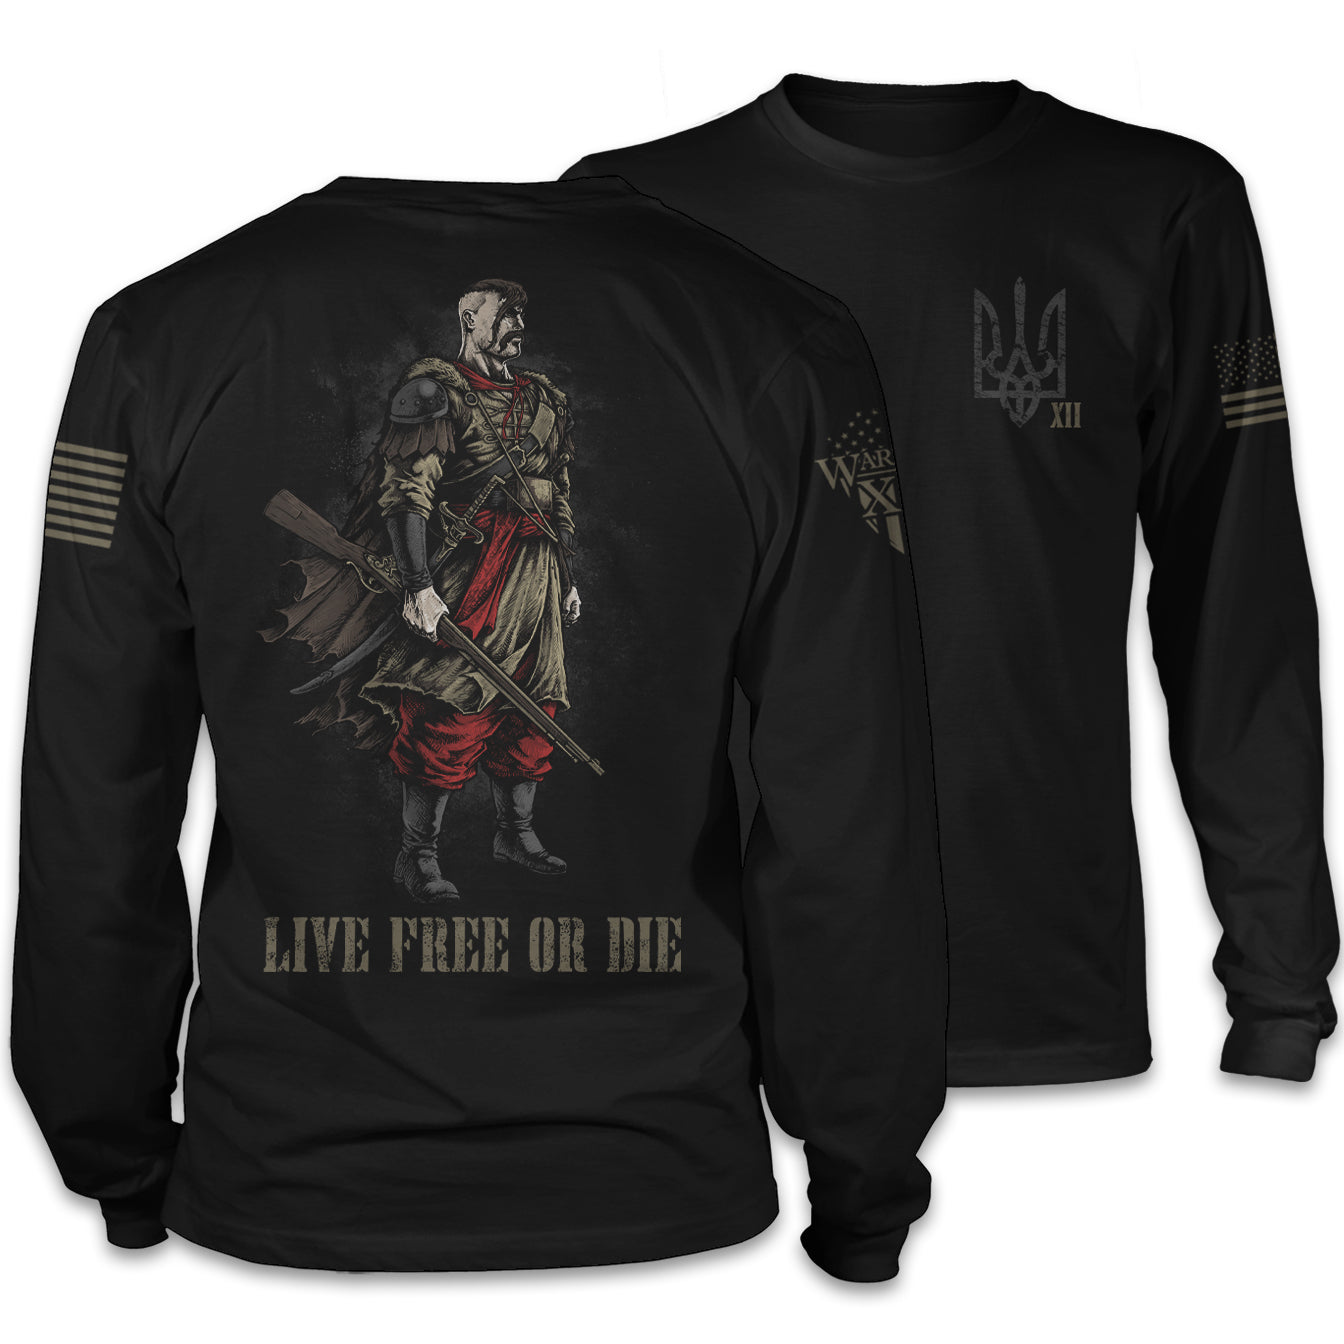 Front & back black long sleeve shirt with a cossack warrior with the words "live free or die" printed on the back of the shirt.